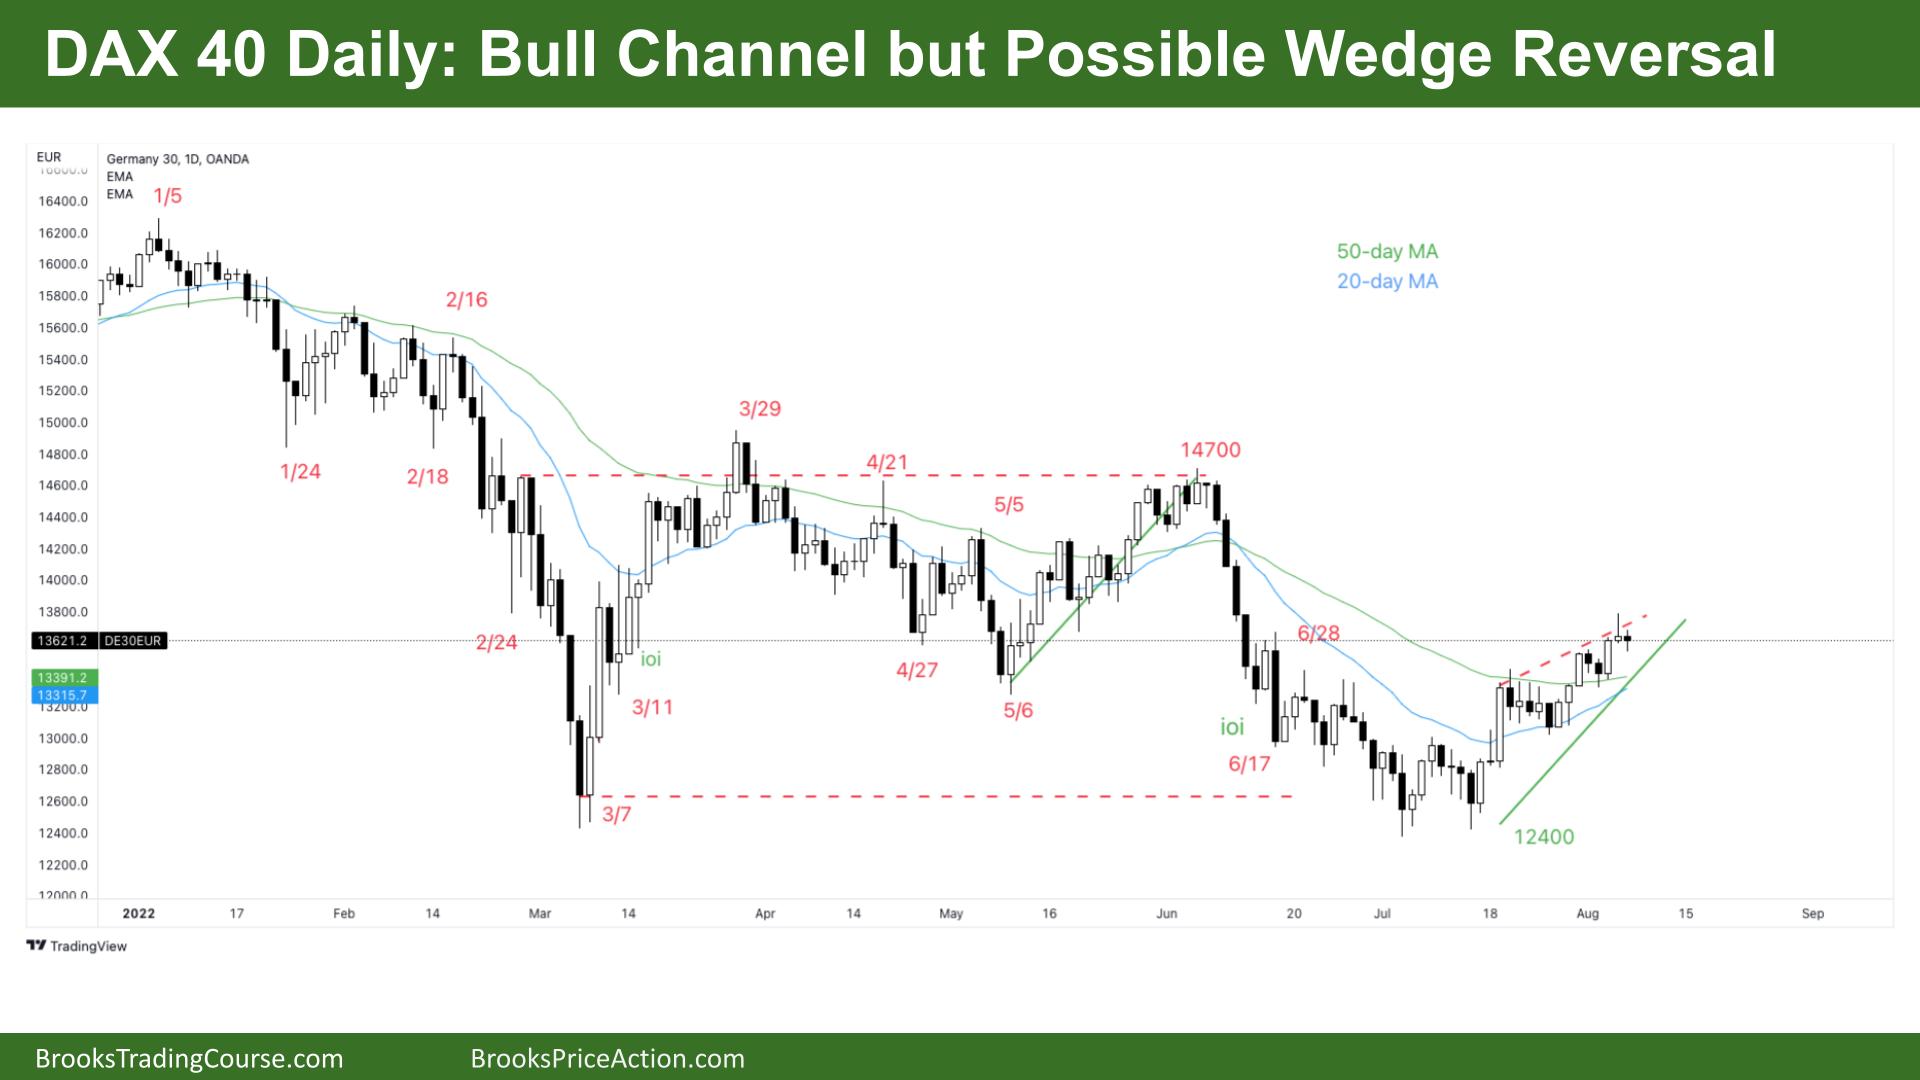 DAX 40 Daily Bull Channel but Possible Wedge Reversal